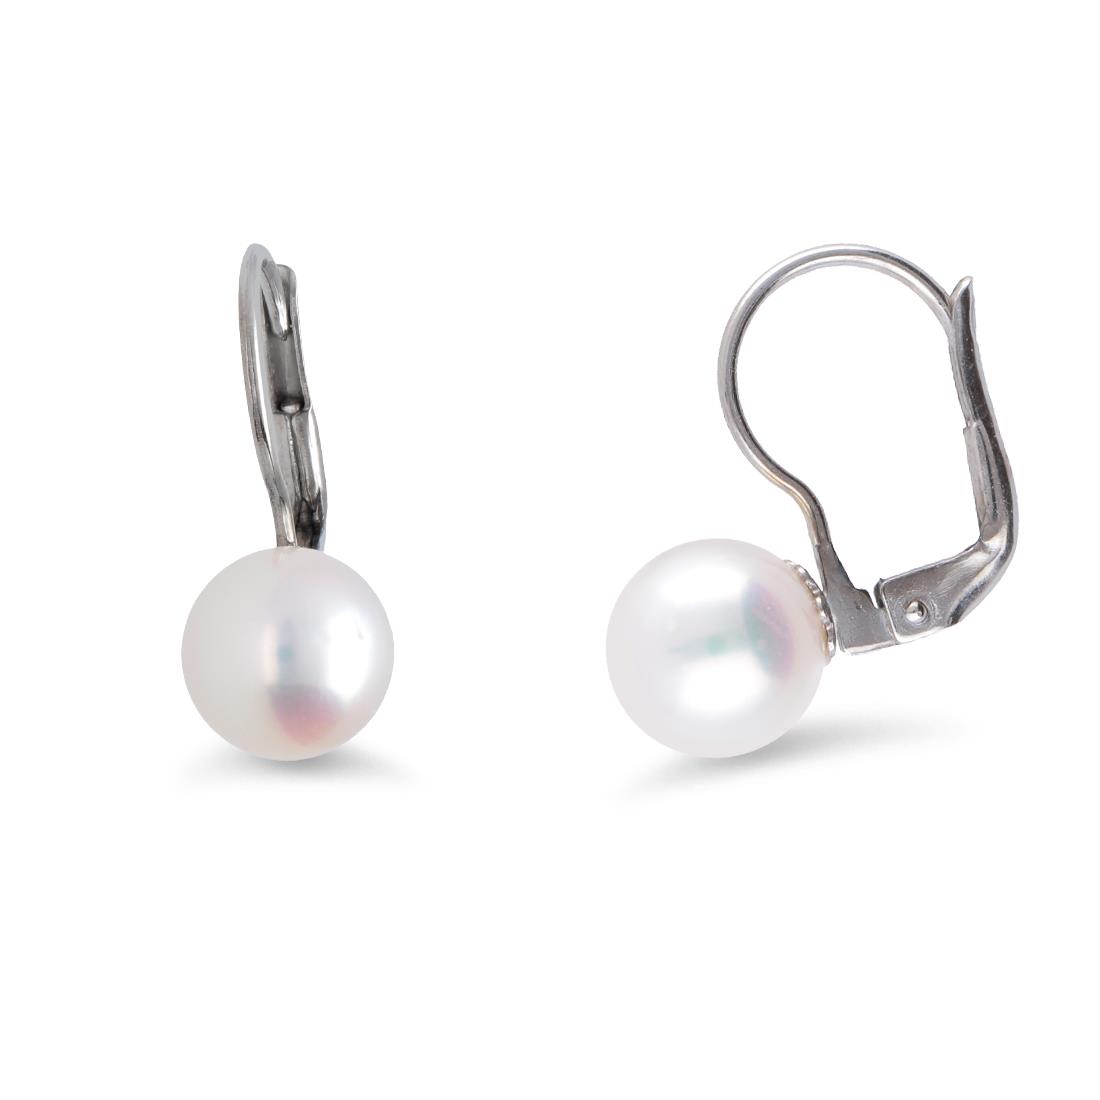 Silver earrings with pearls  - MAYUMI